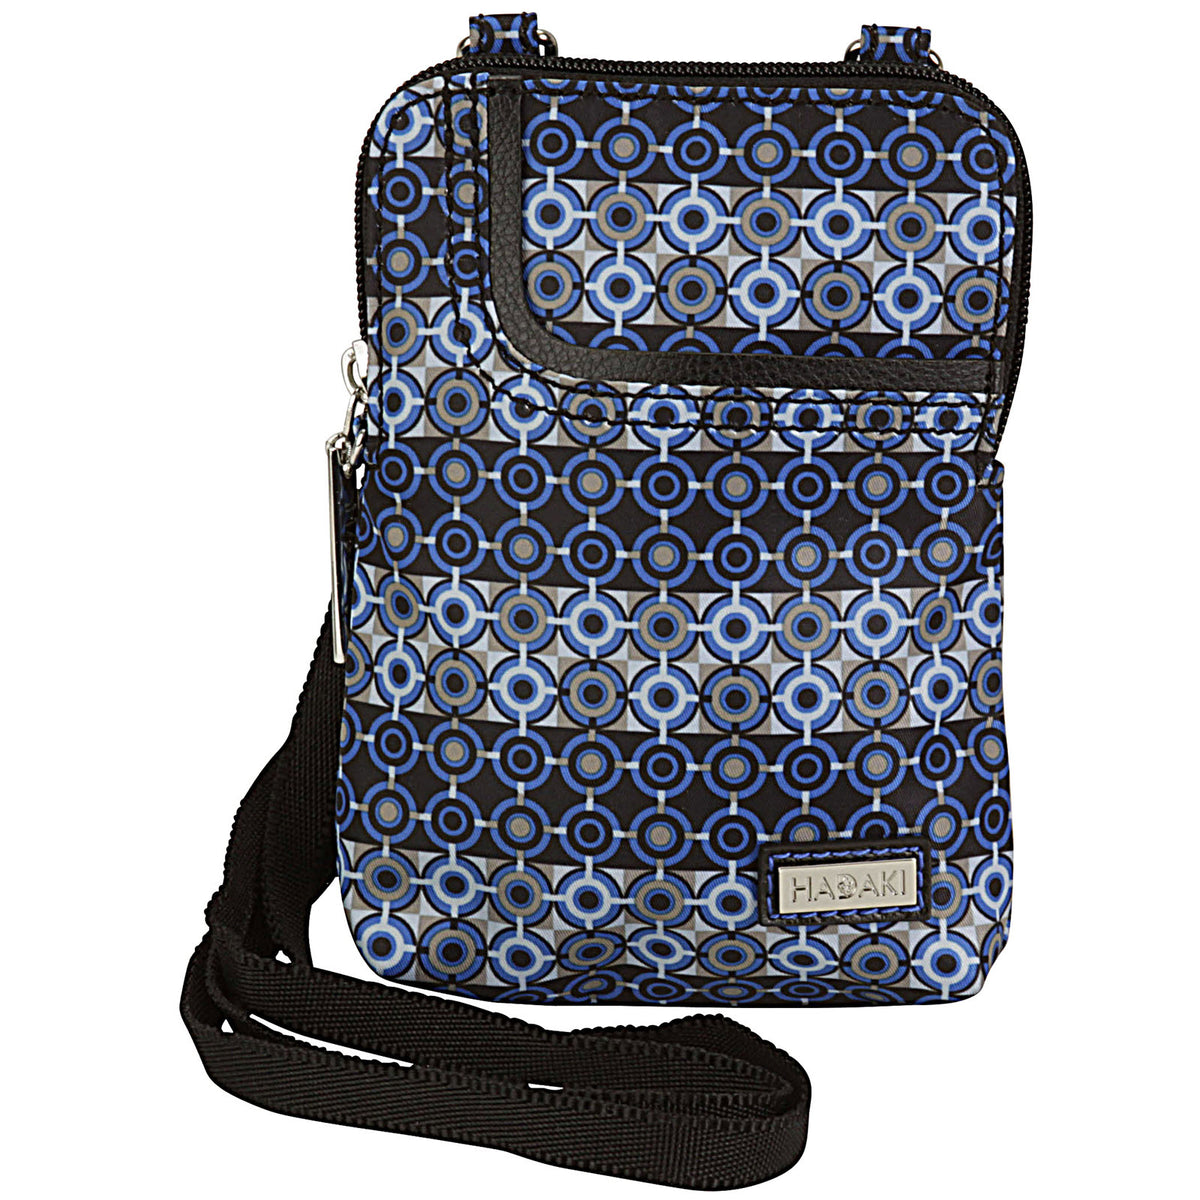 The Hadaki HADAKI MOBILE CROSSBODY GRID is a small, patterned blue and black crossbody bag with a zipper closure and an adjustable black strap, perfect for those who prefer to travel light.